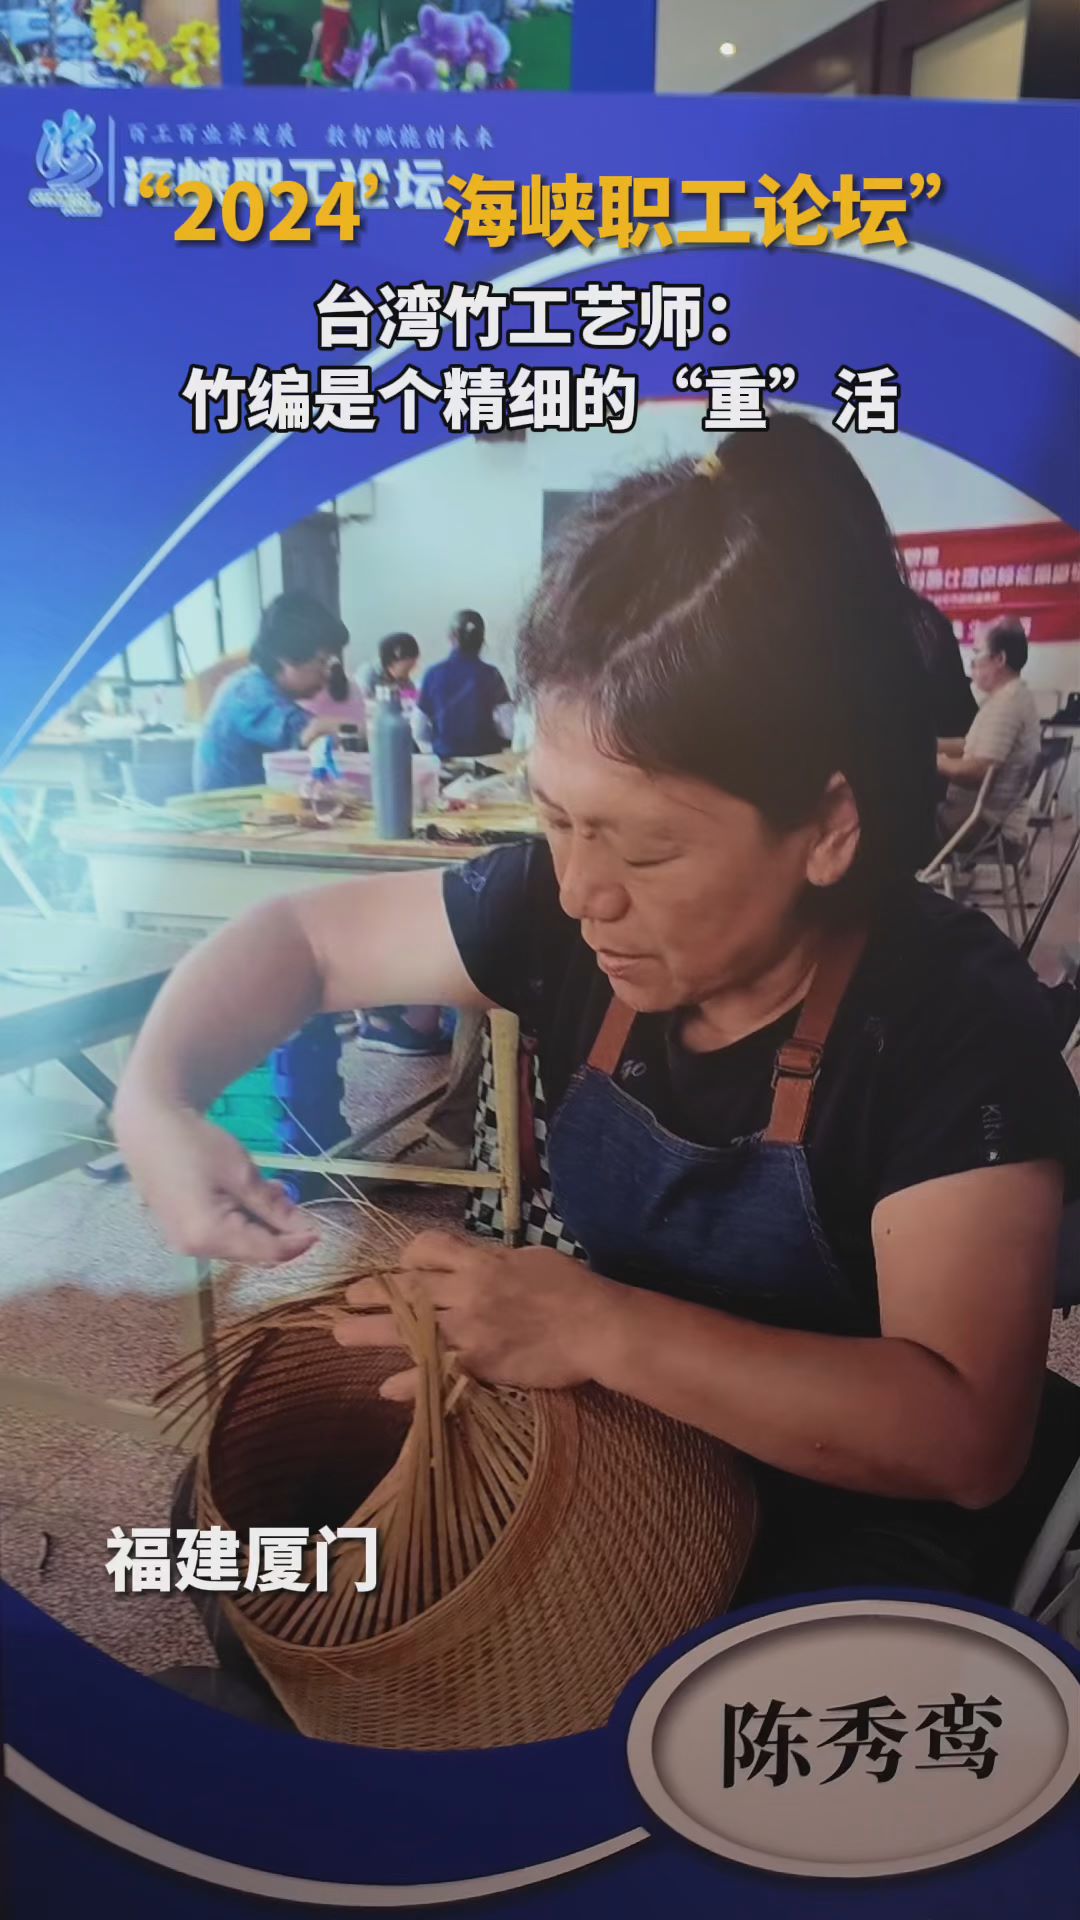  Taiwan Bamboo Craftsman: Bamboo weaving is a delicate "heavy" job